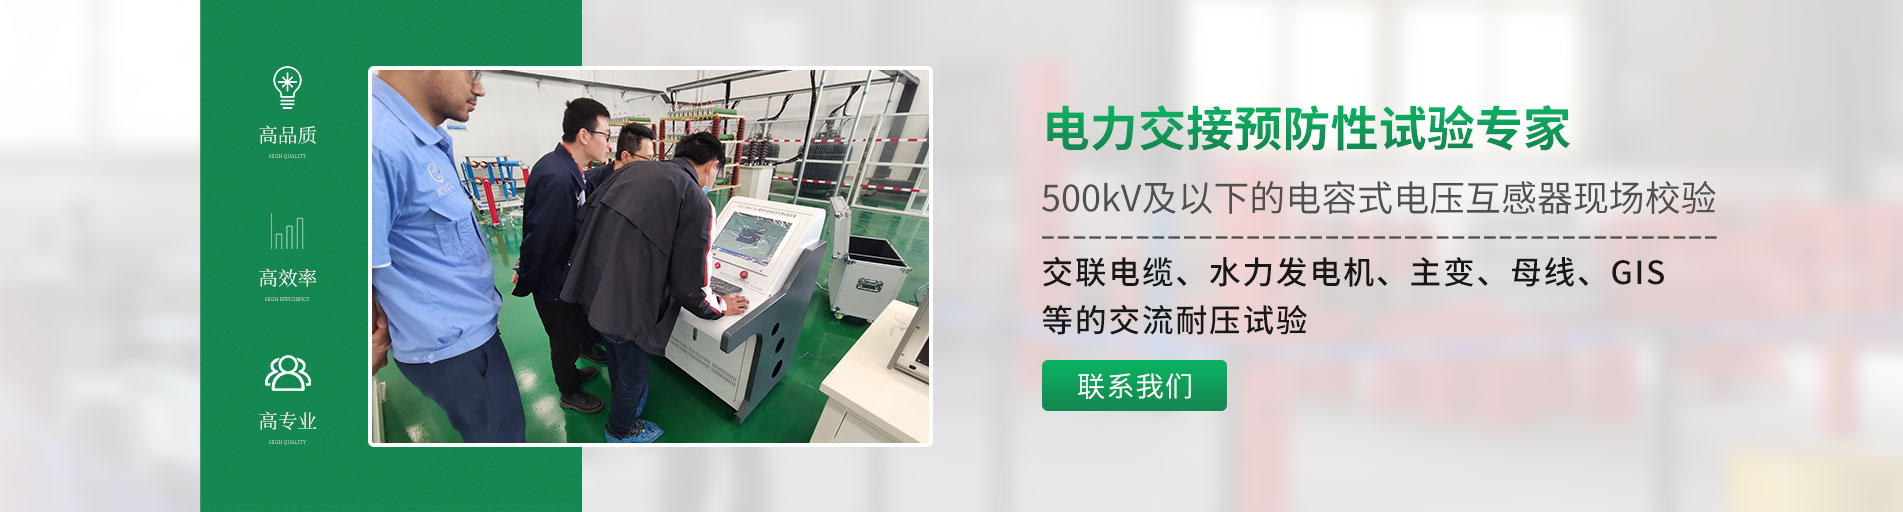 Strength to win customer trust! Shandong customers purchase and test three-level equipment